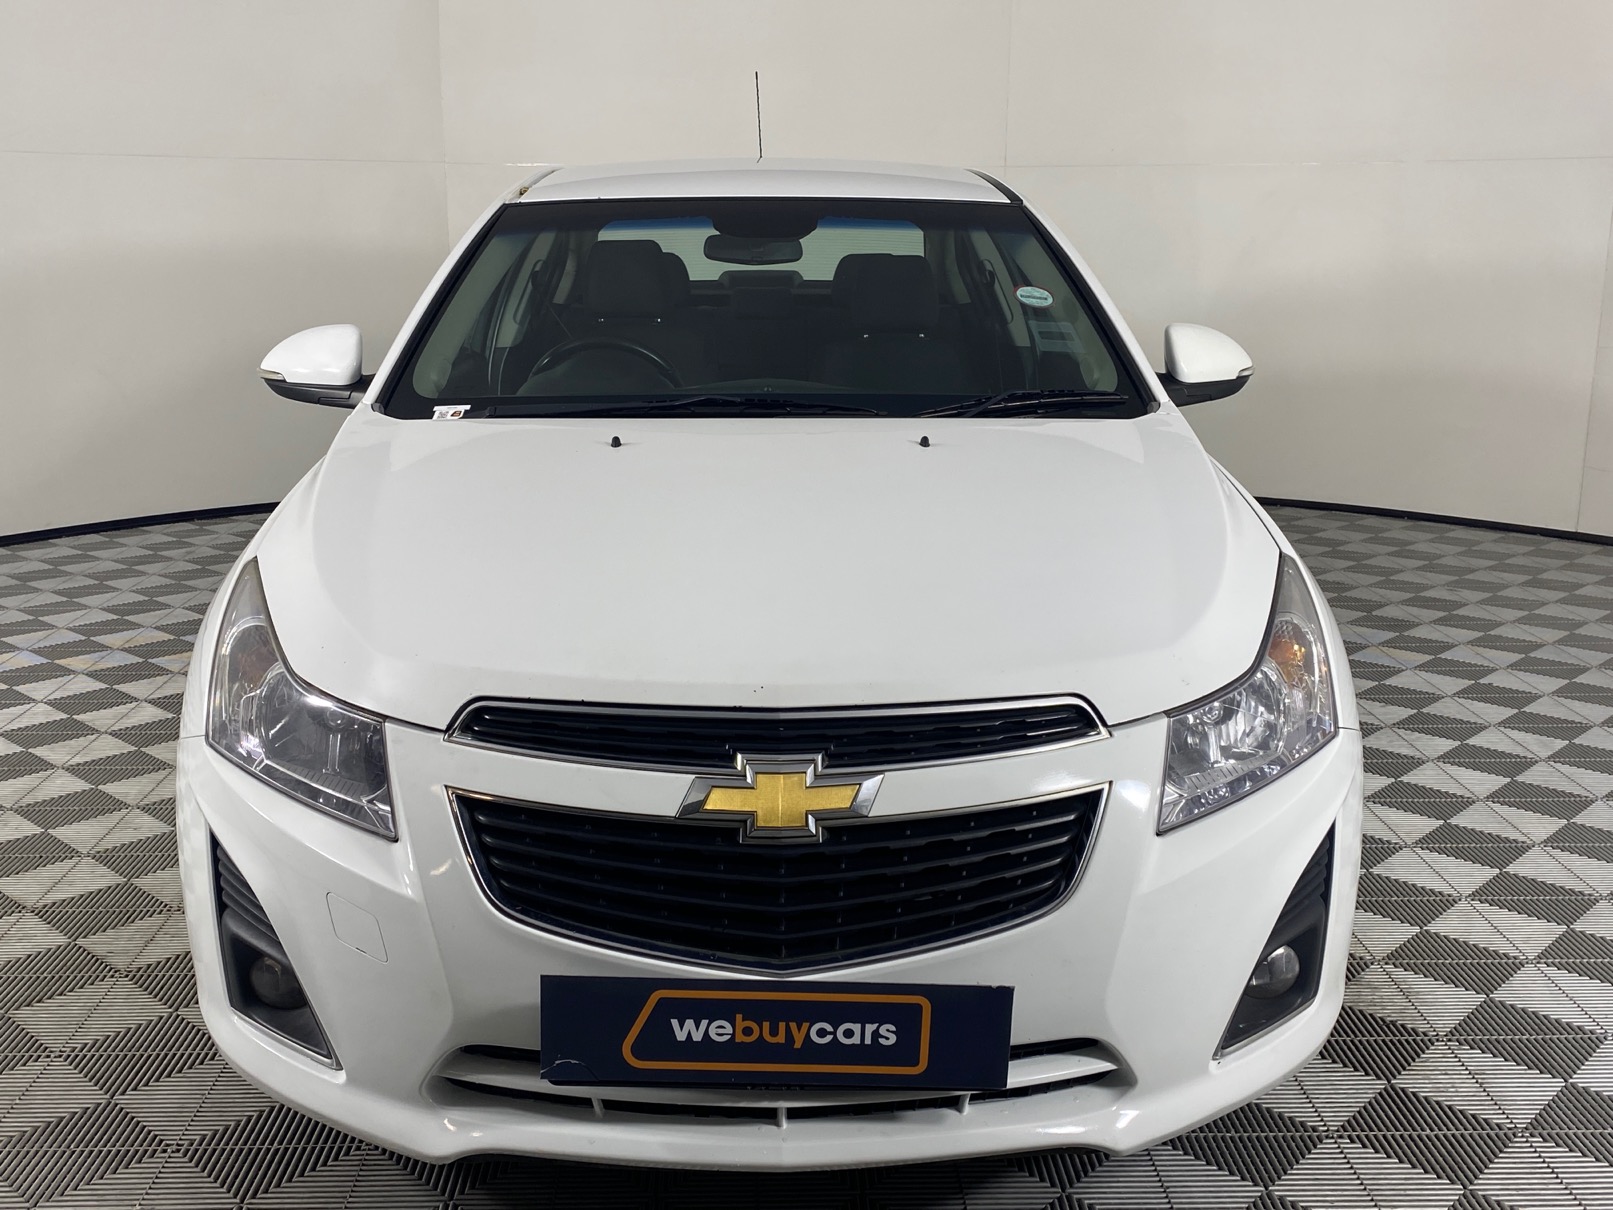 Used 2014 Chevrolet Cruze 2.0d LS for sale WeBuyCars